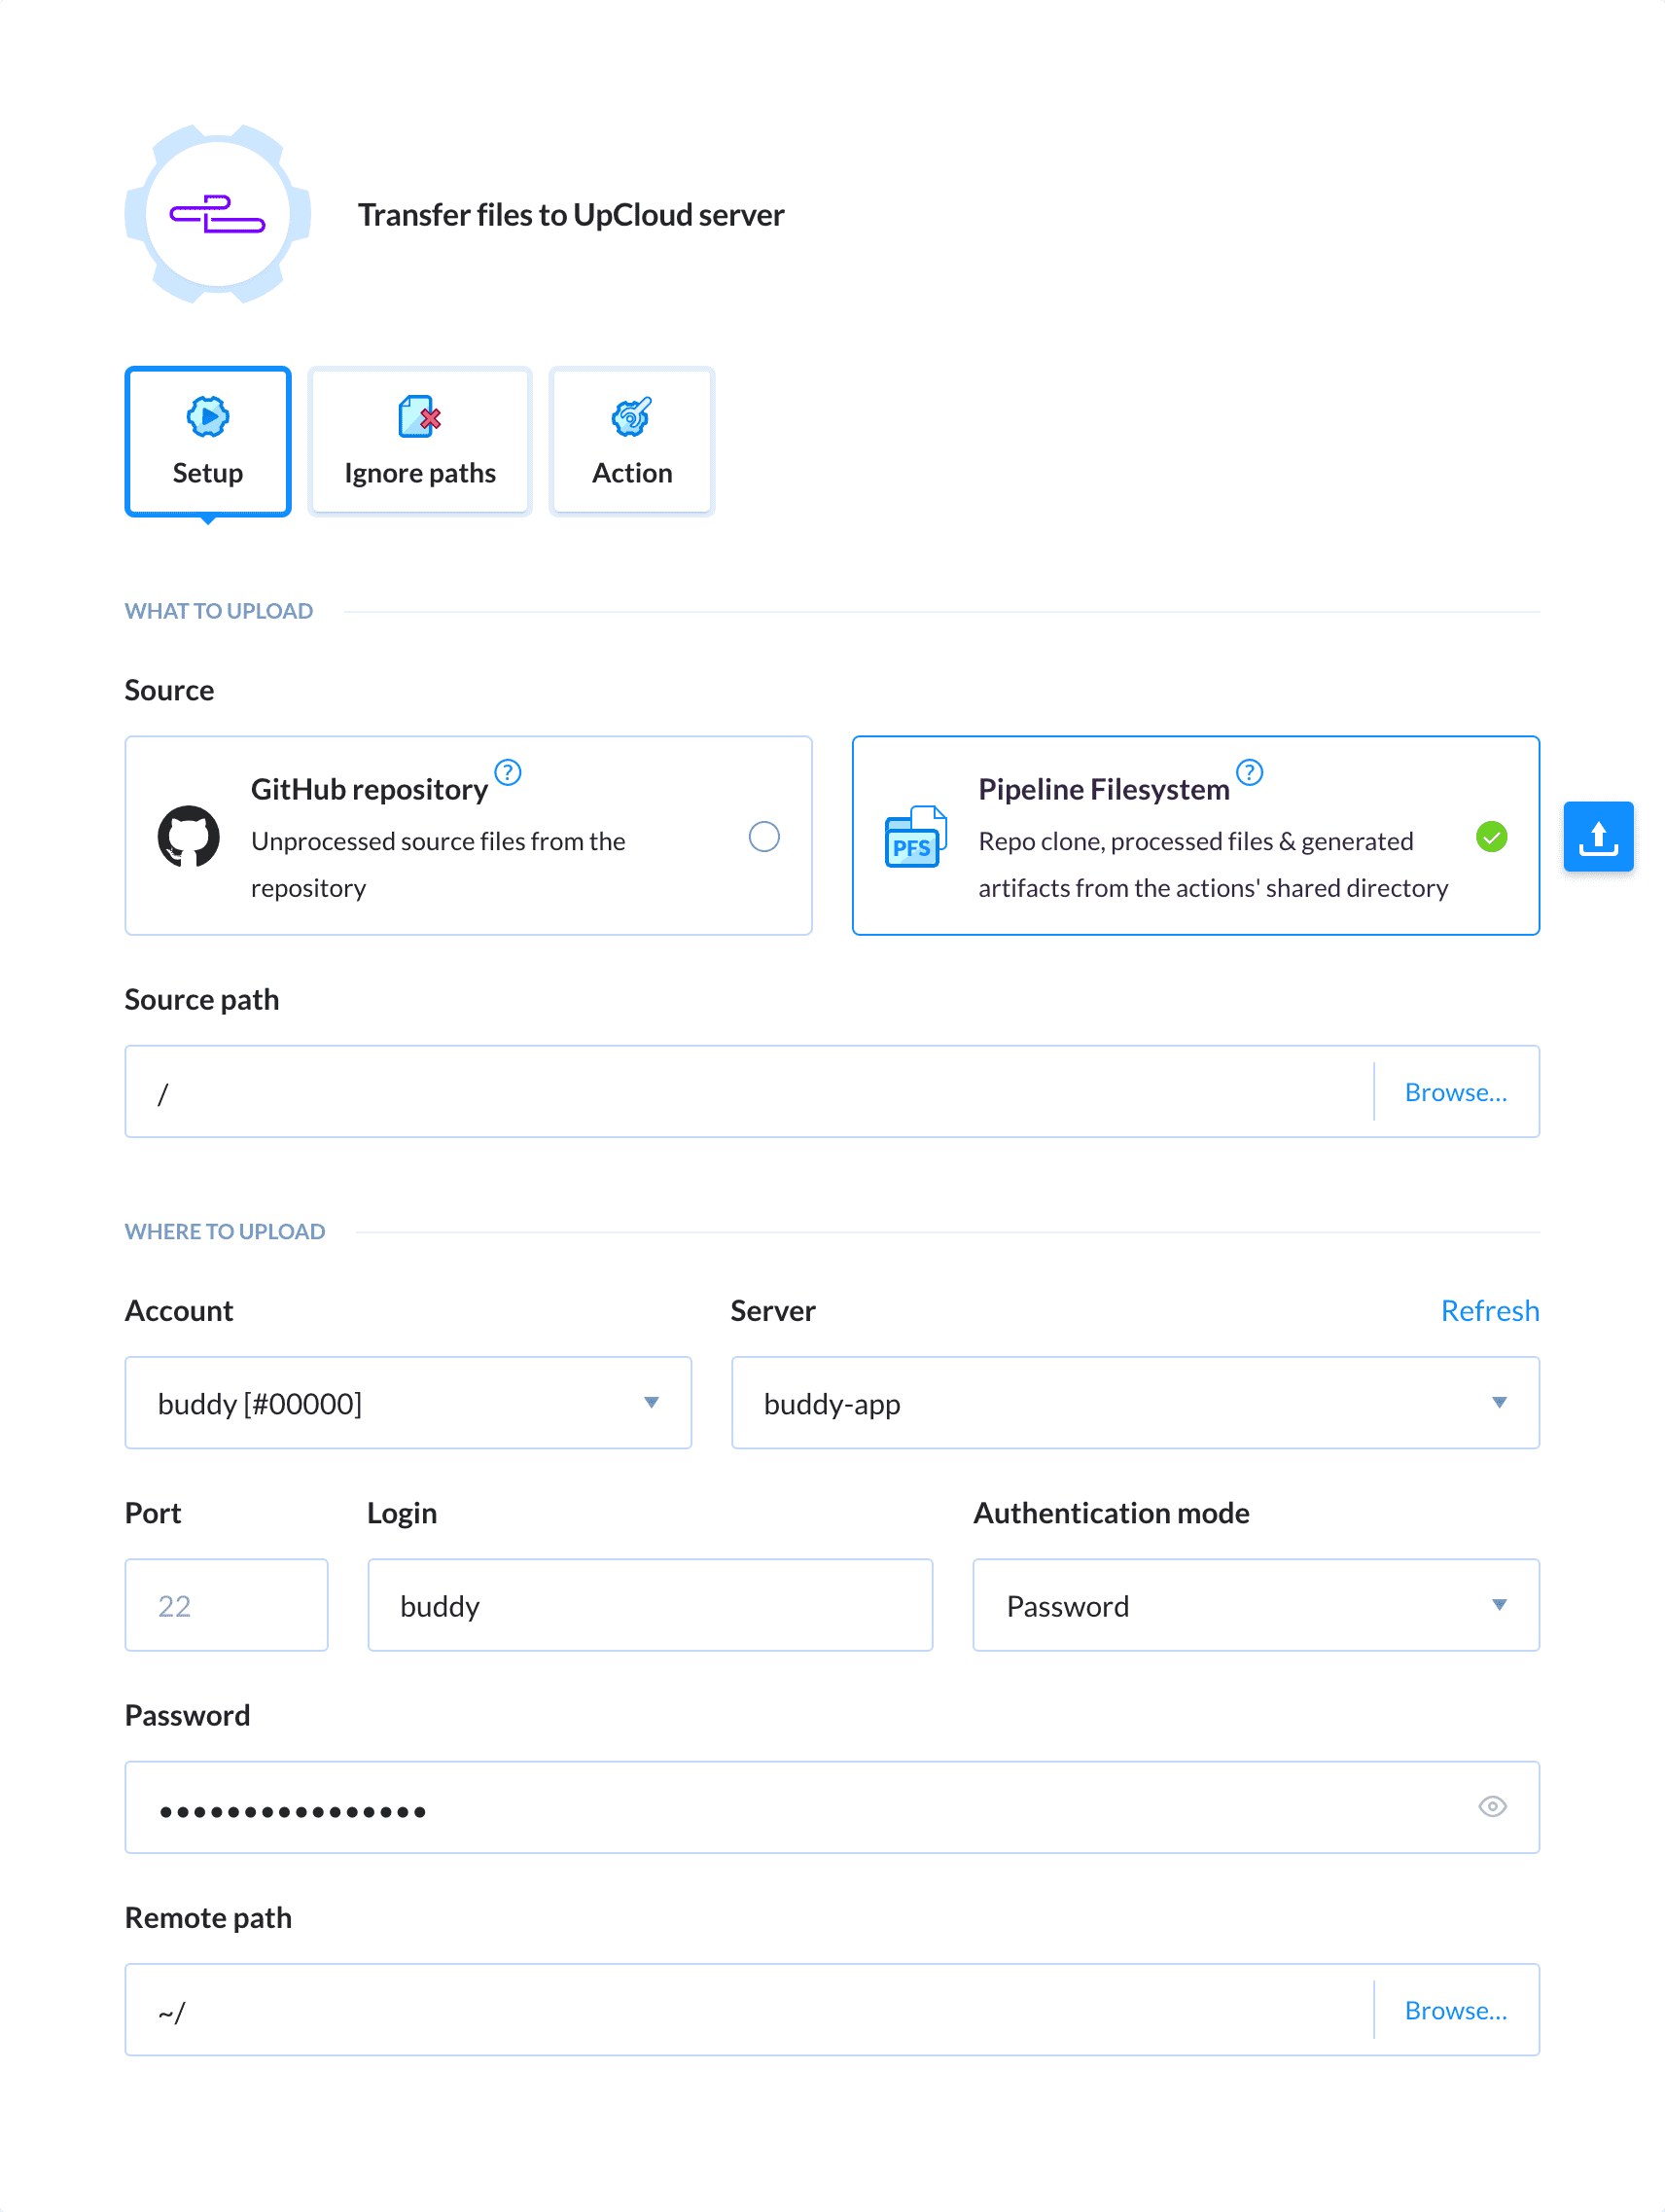 Preview UpCloud action